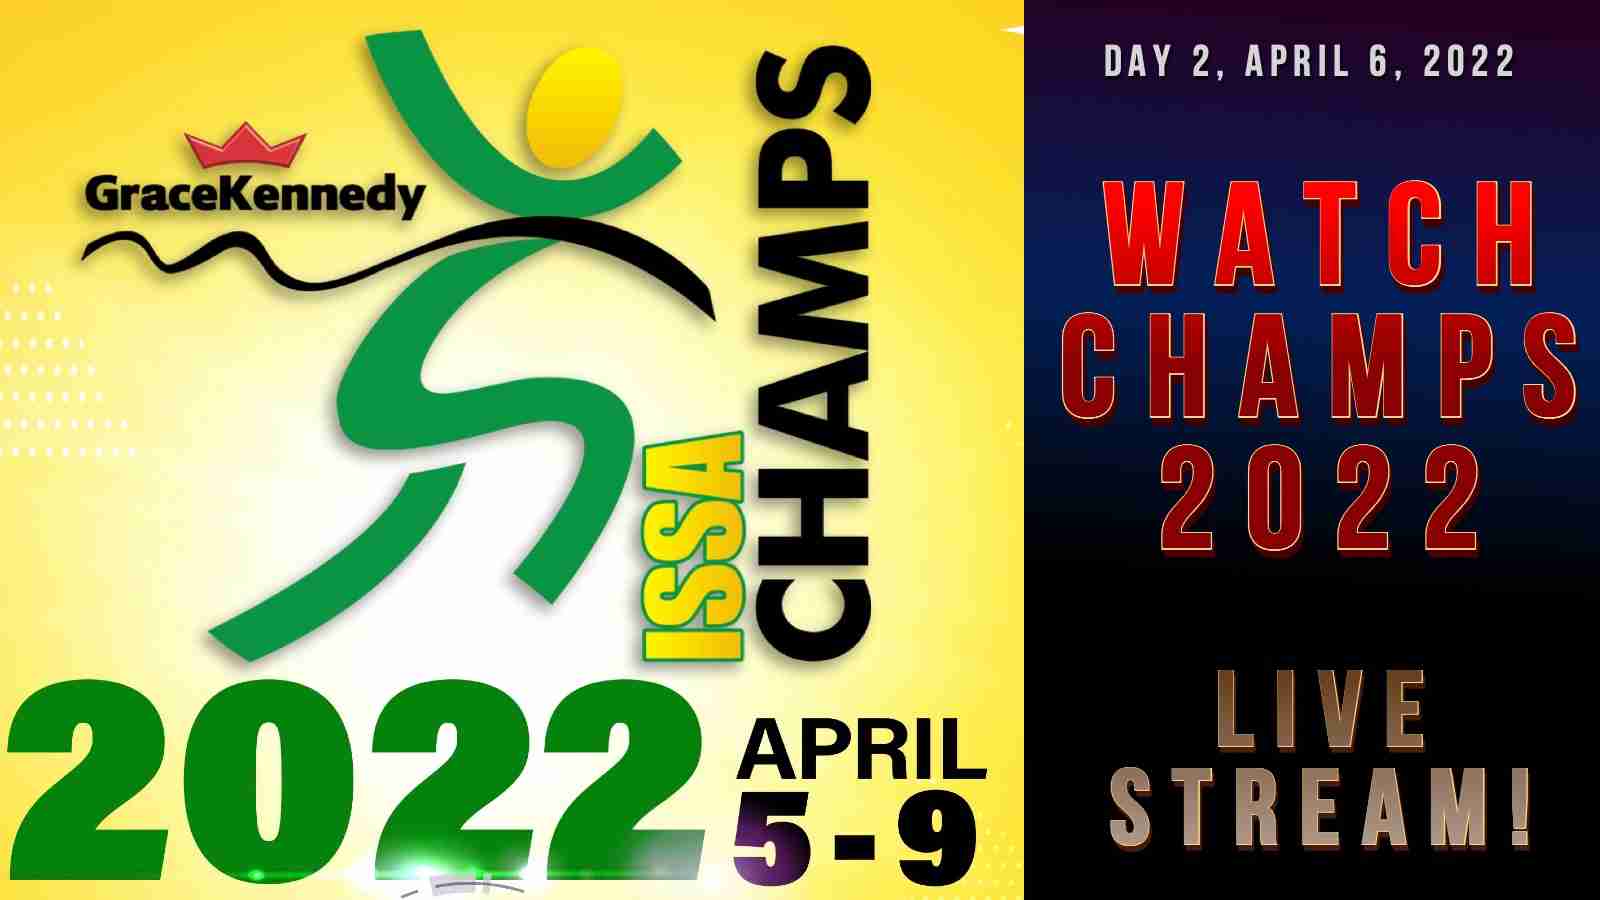 Day 2: How to watch CHAMPS 2022? Order of events schedule